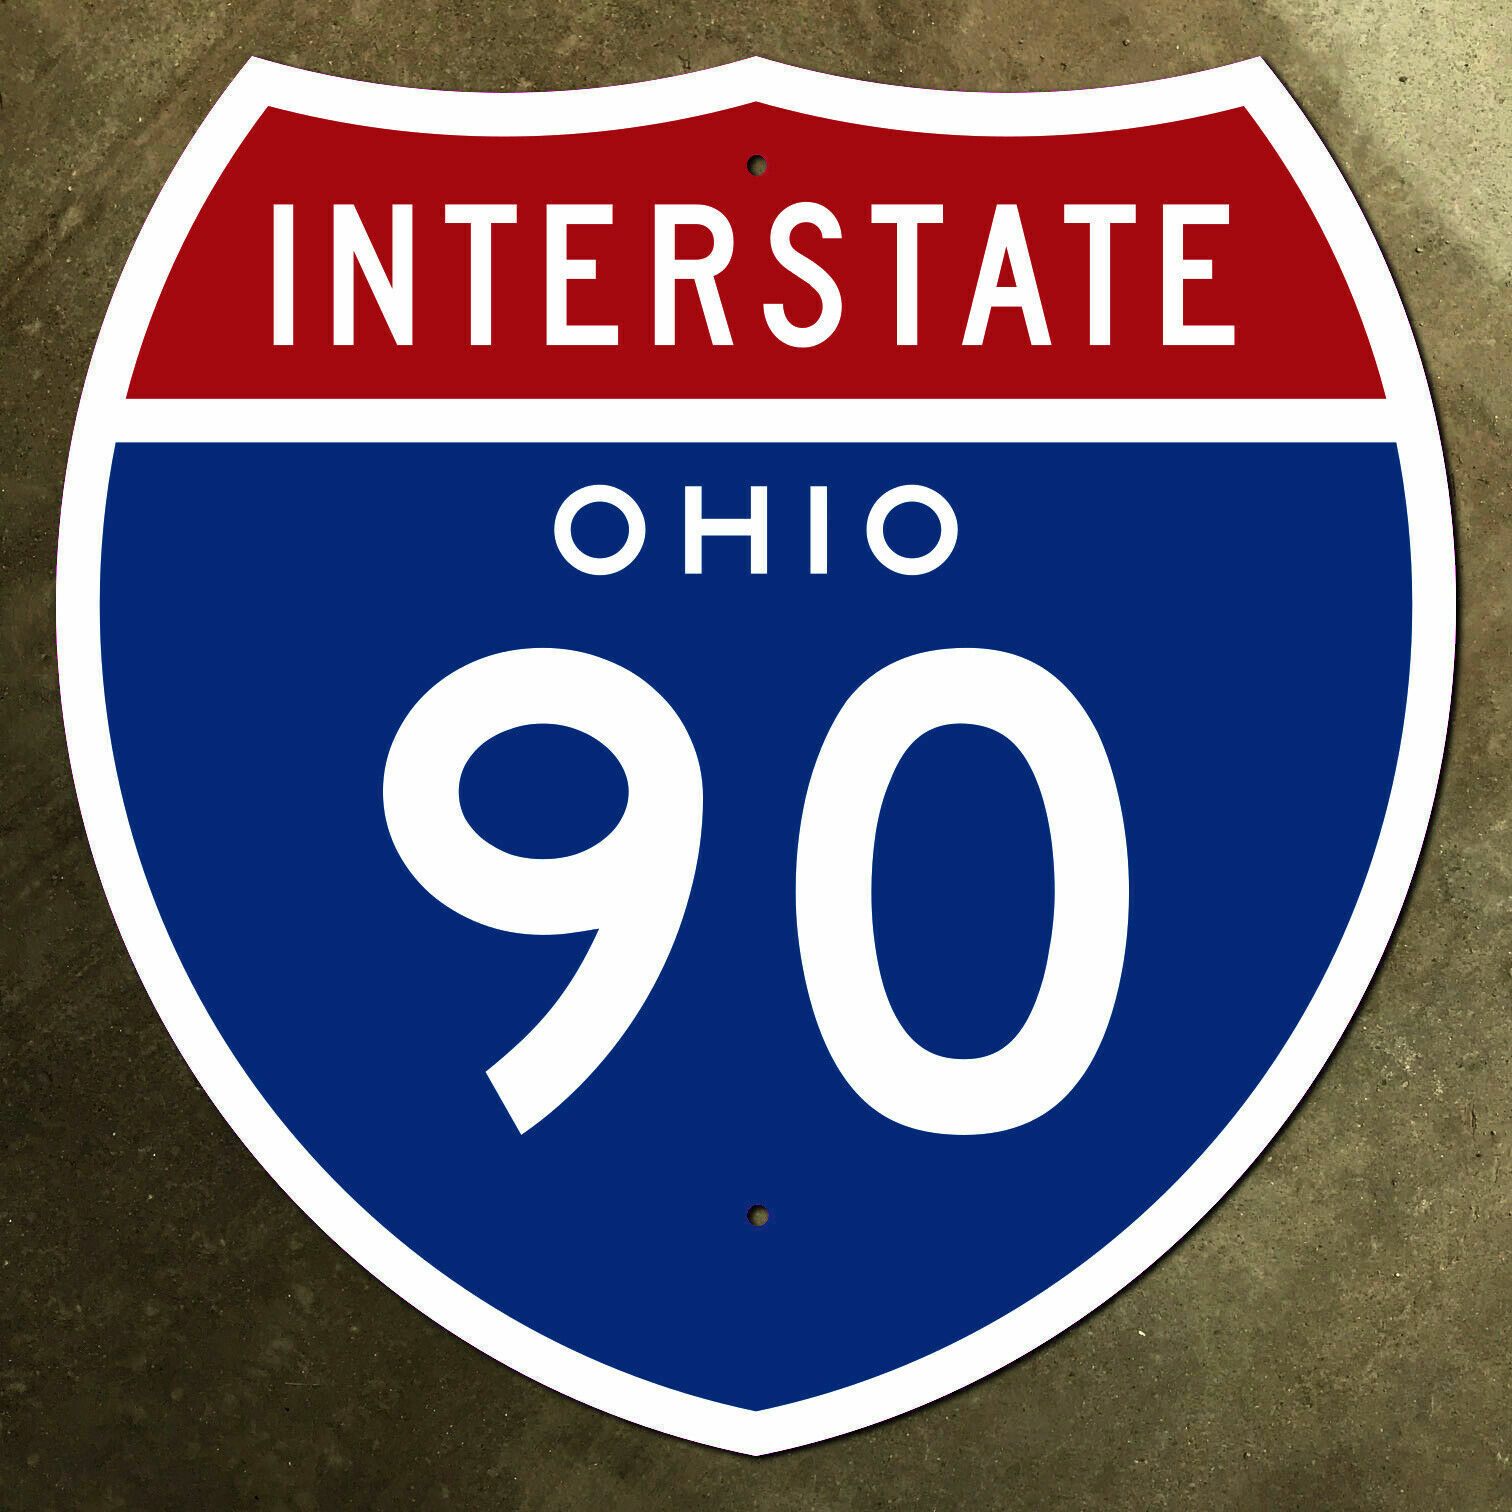 Ohio interstate route 90 highway marker road sign 1957 Turnpike Cleveland 12x12